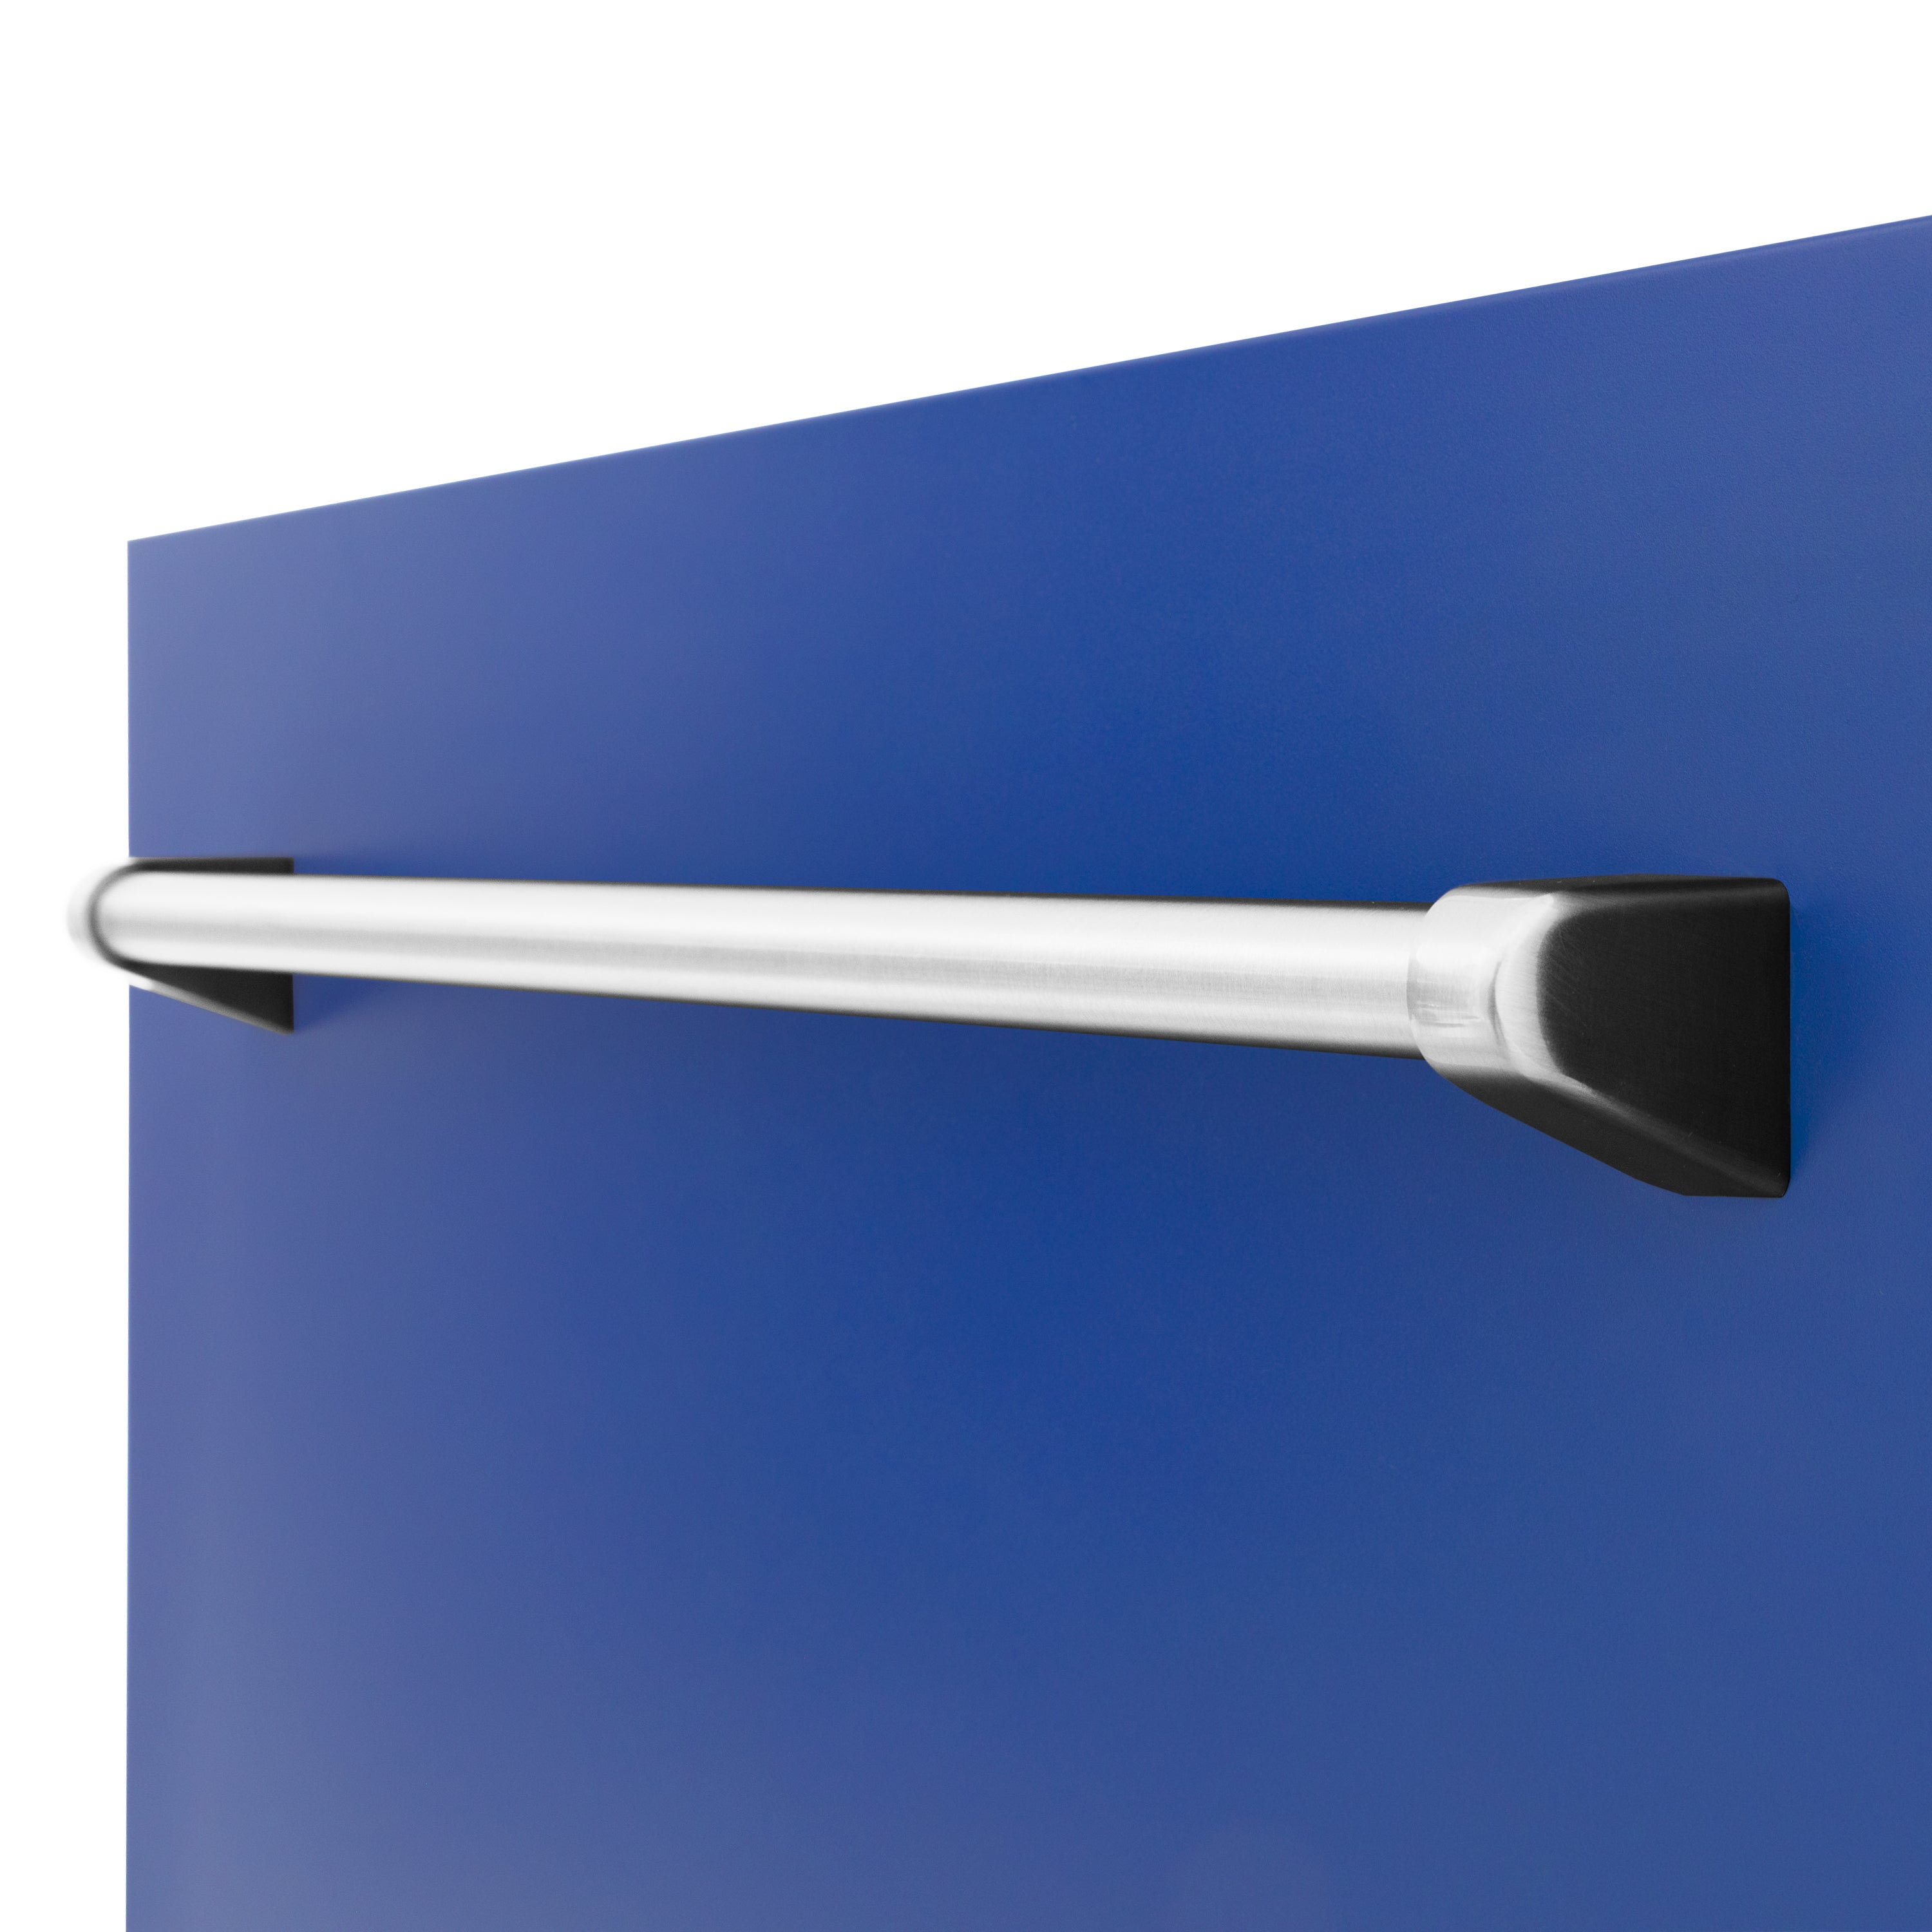 ZLINE 18" Tallac Dishwasher Panel in Blue Matte with Traditional Handle (DPV-BM-18)